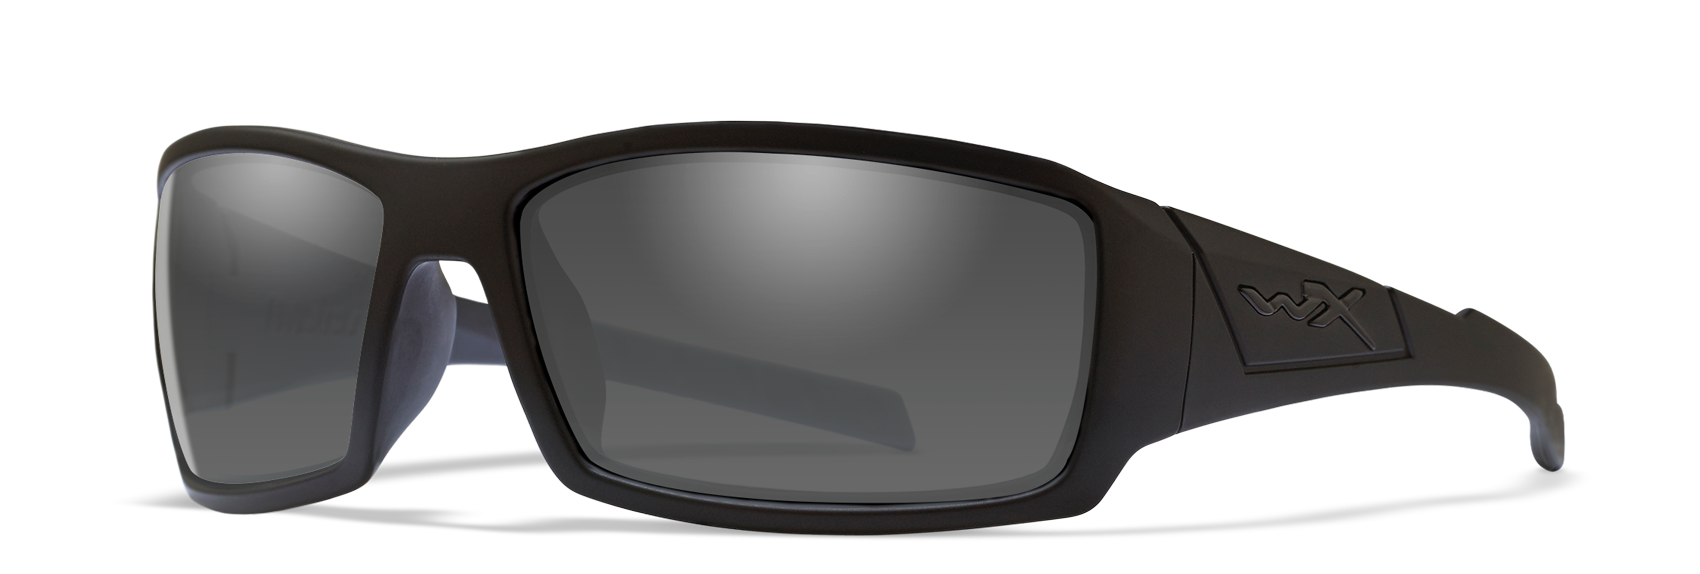 Wiley X WX TWISTED Oval Sunglasses  Matte Black 67-17-125